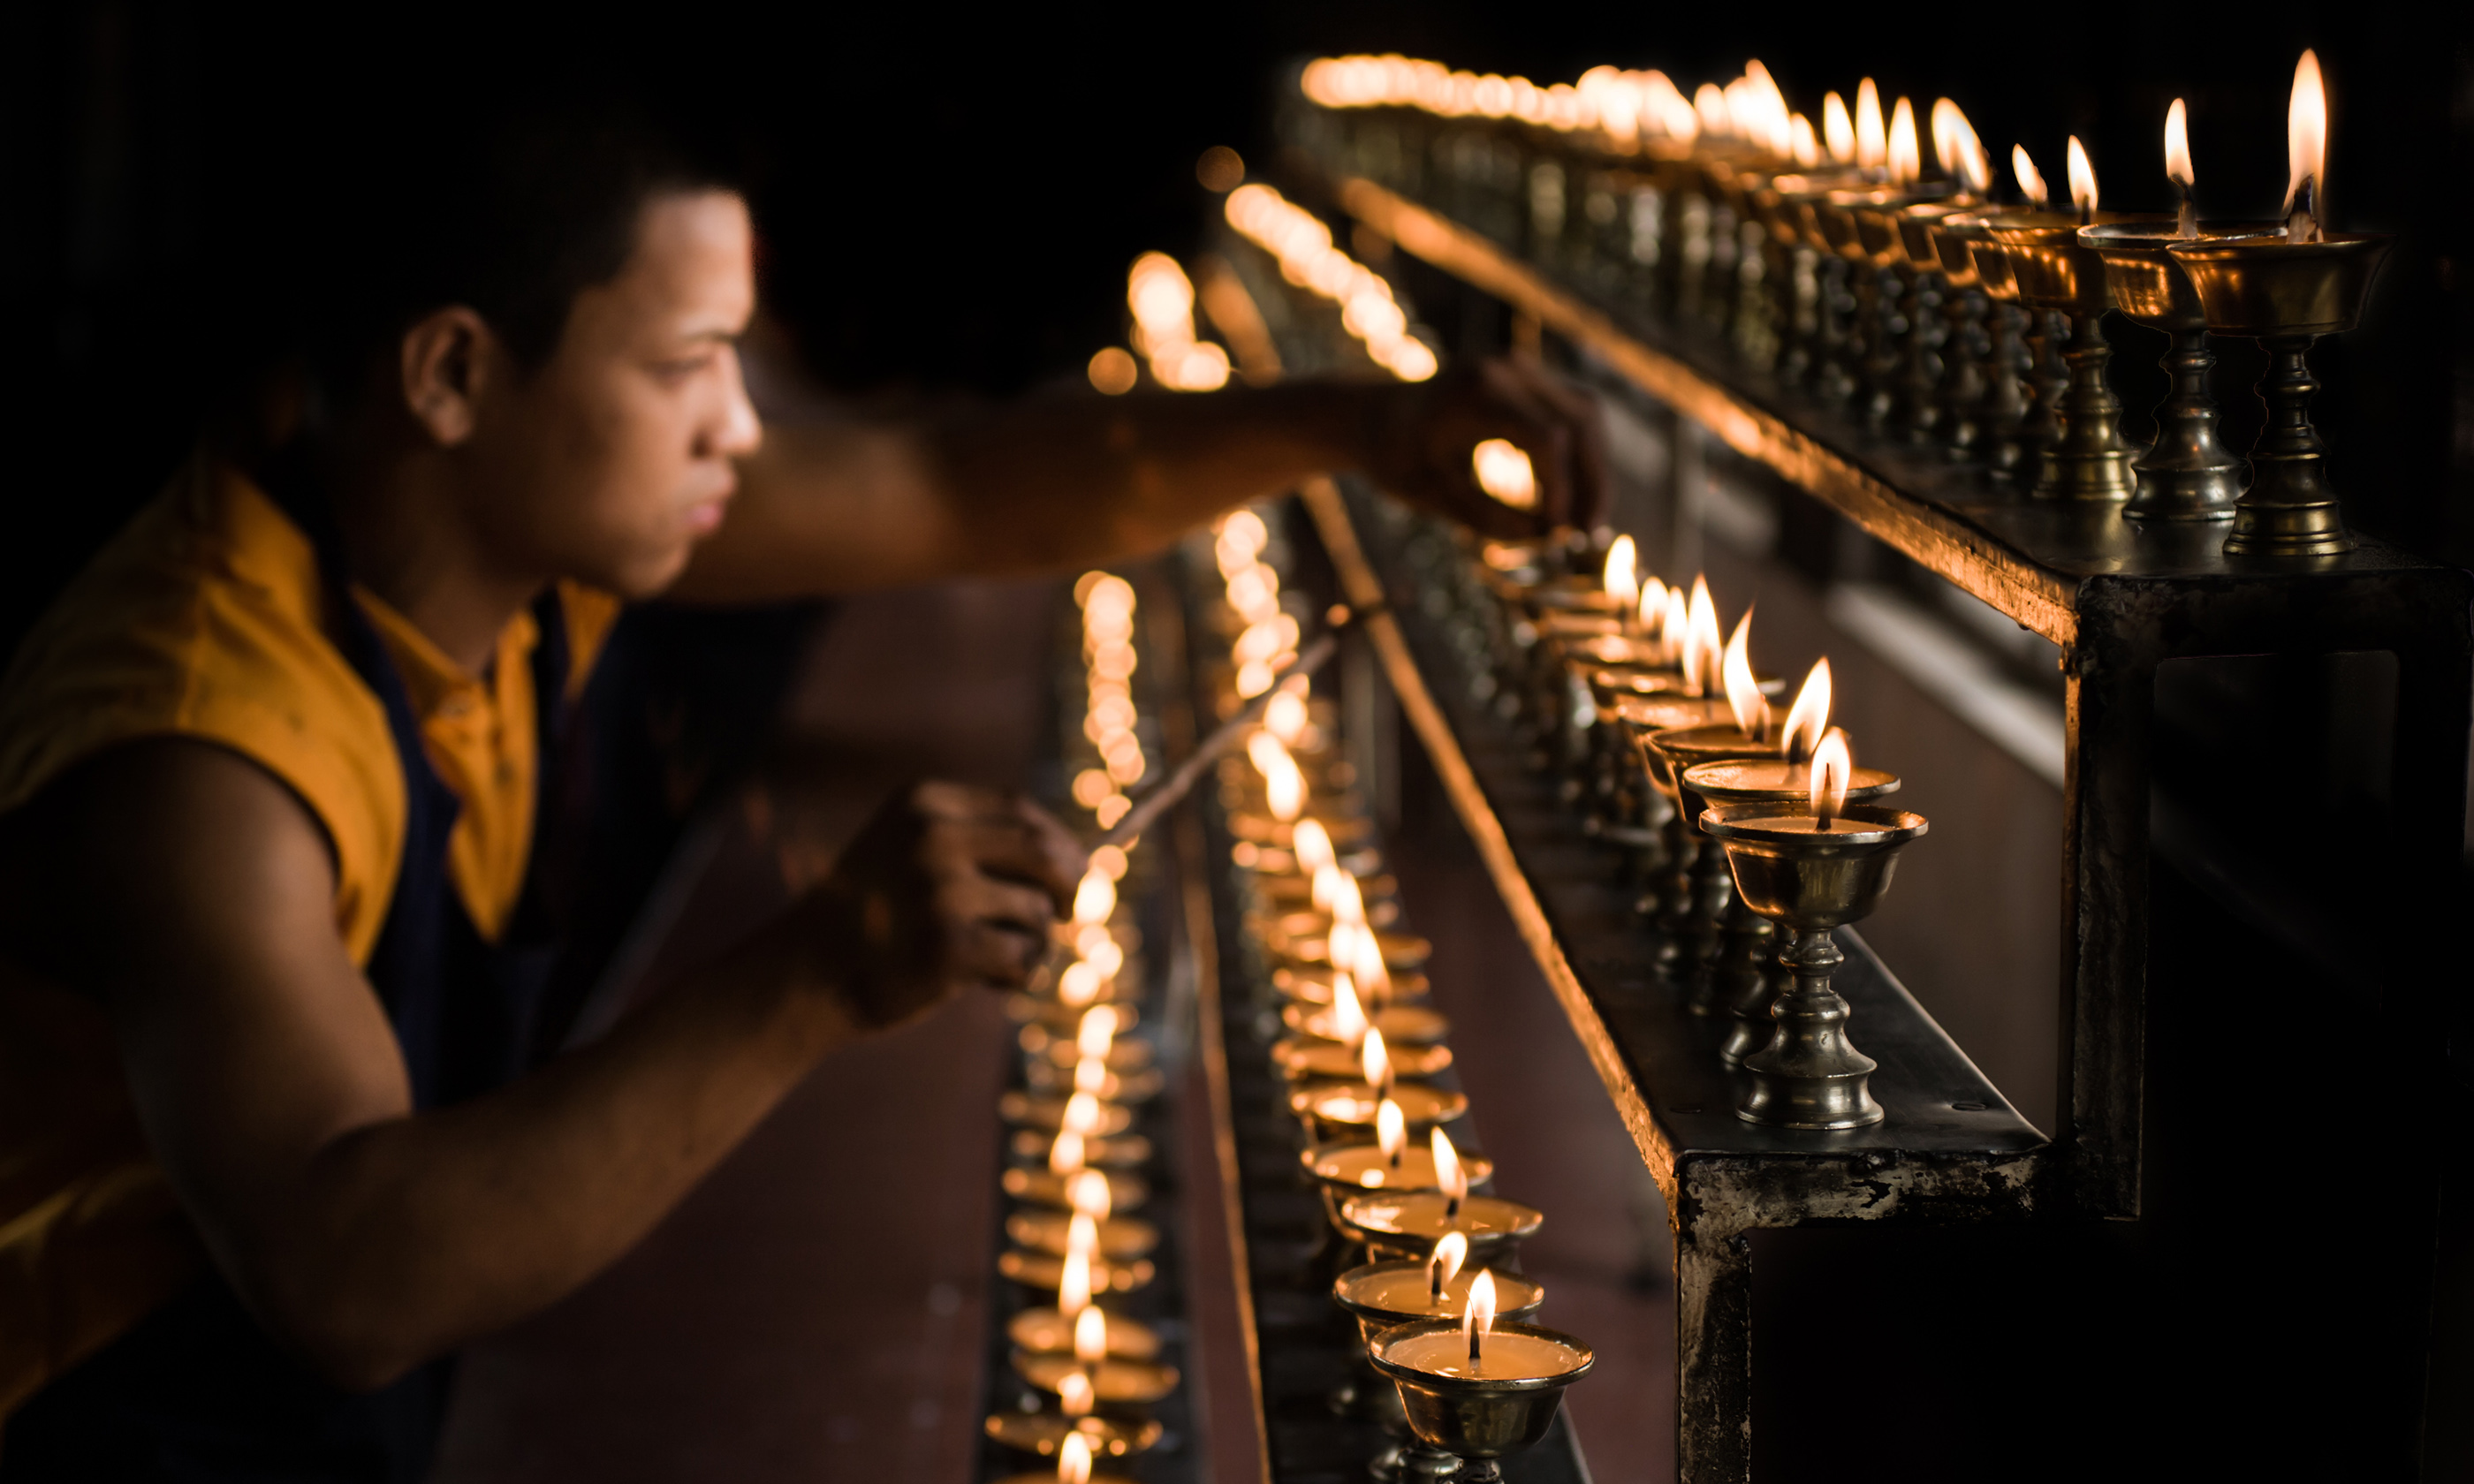 Monk with candles (Shutterstock.com)